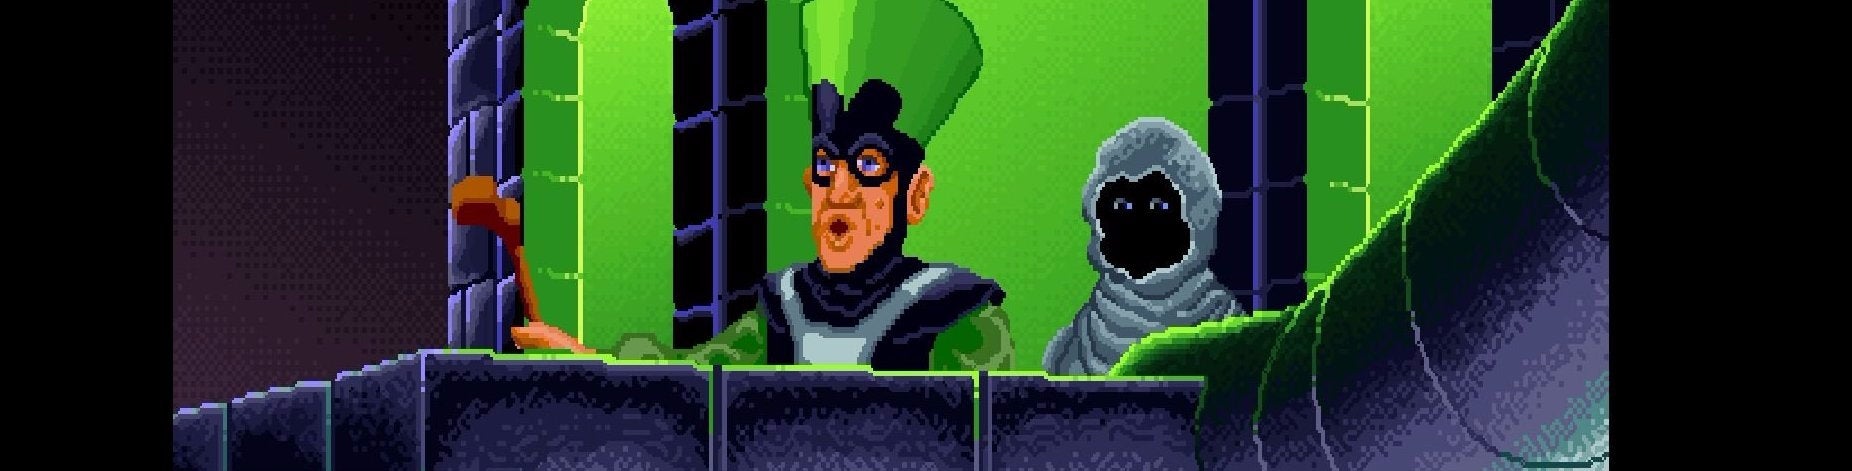 Image for Remembering Loom, the adventure game designed to be completed